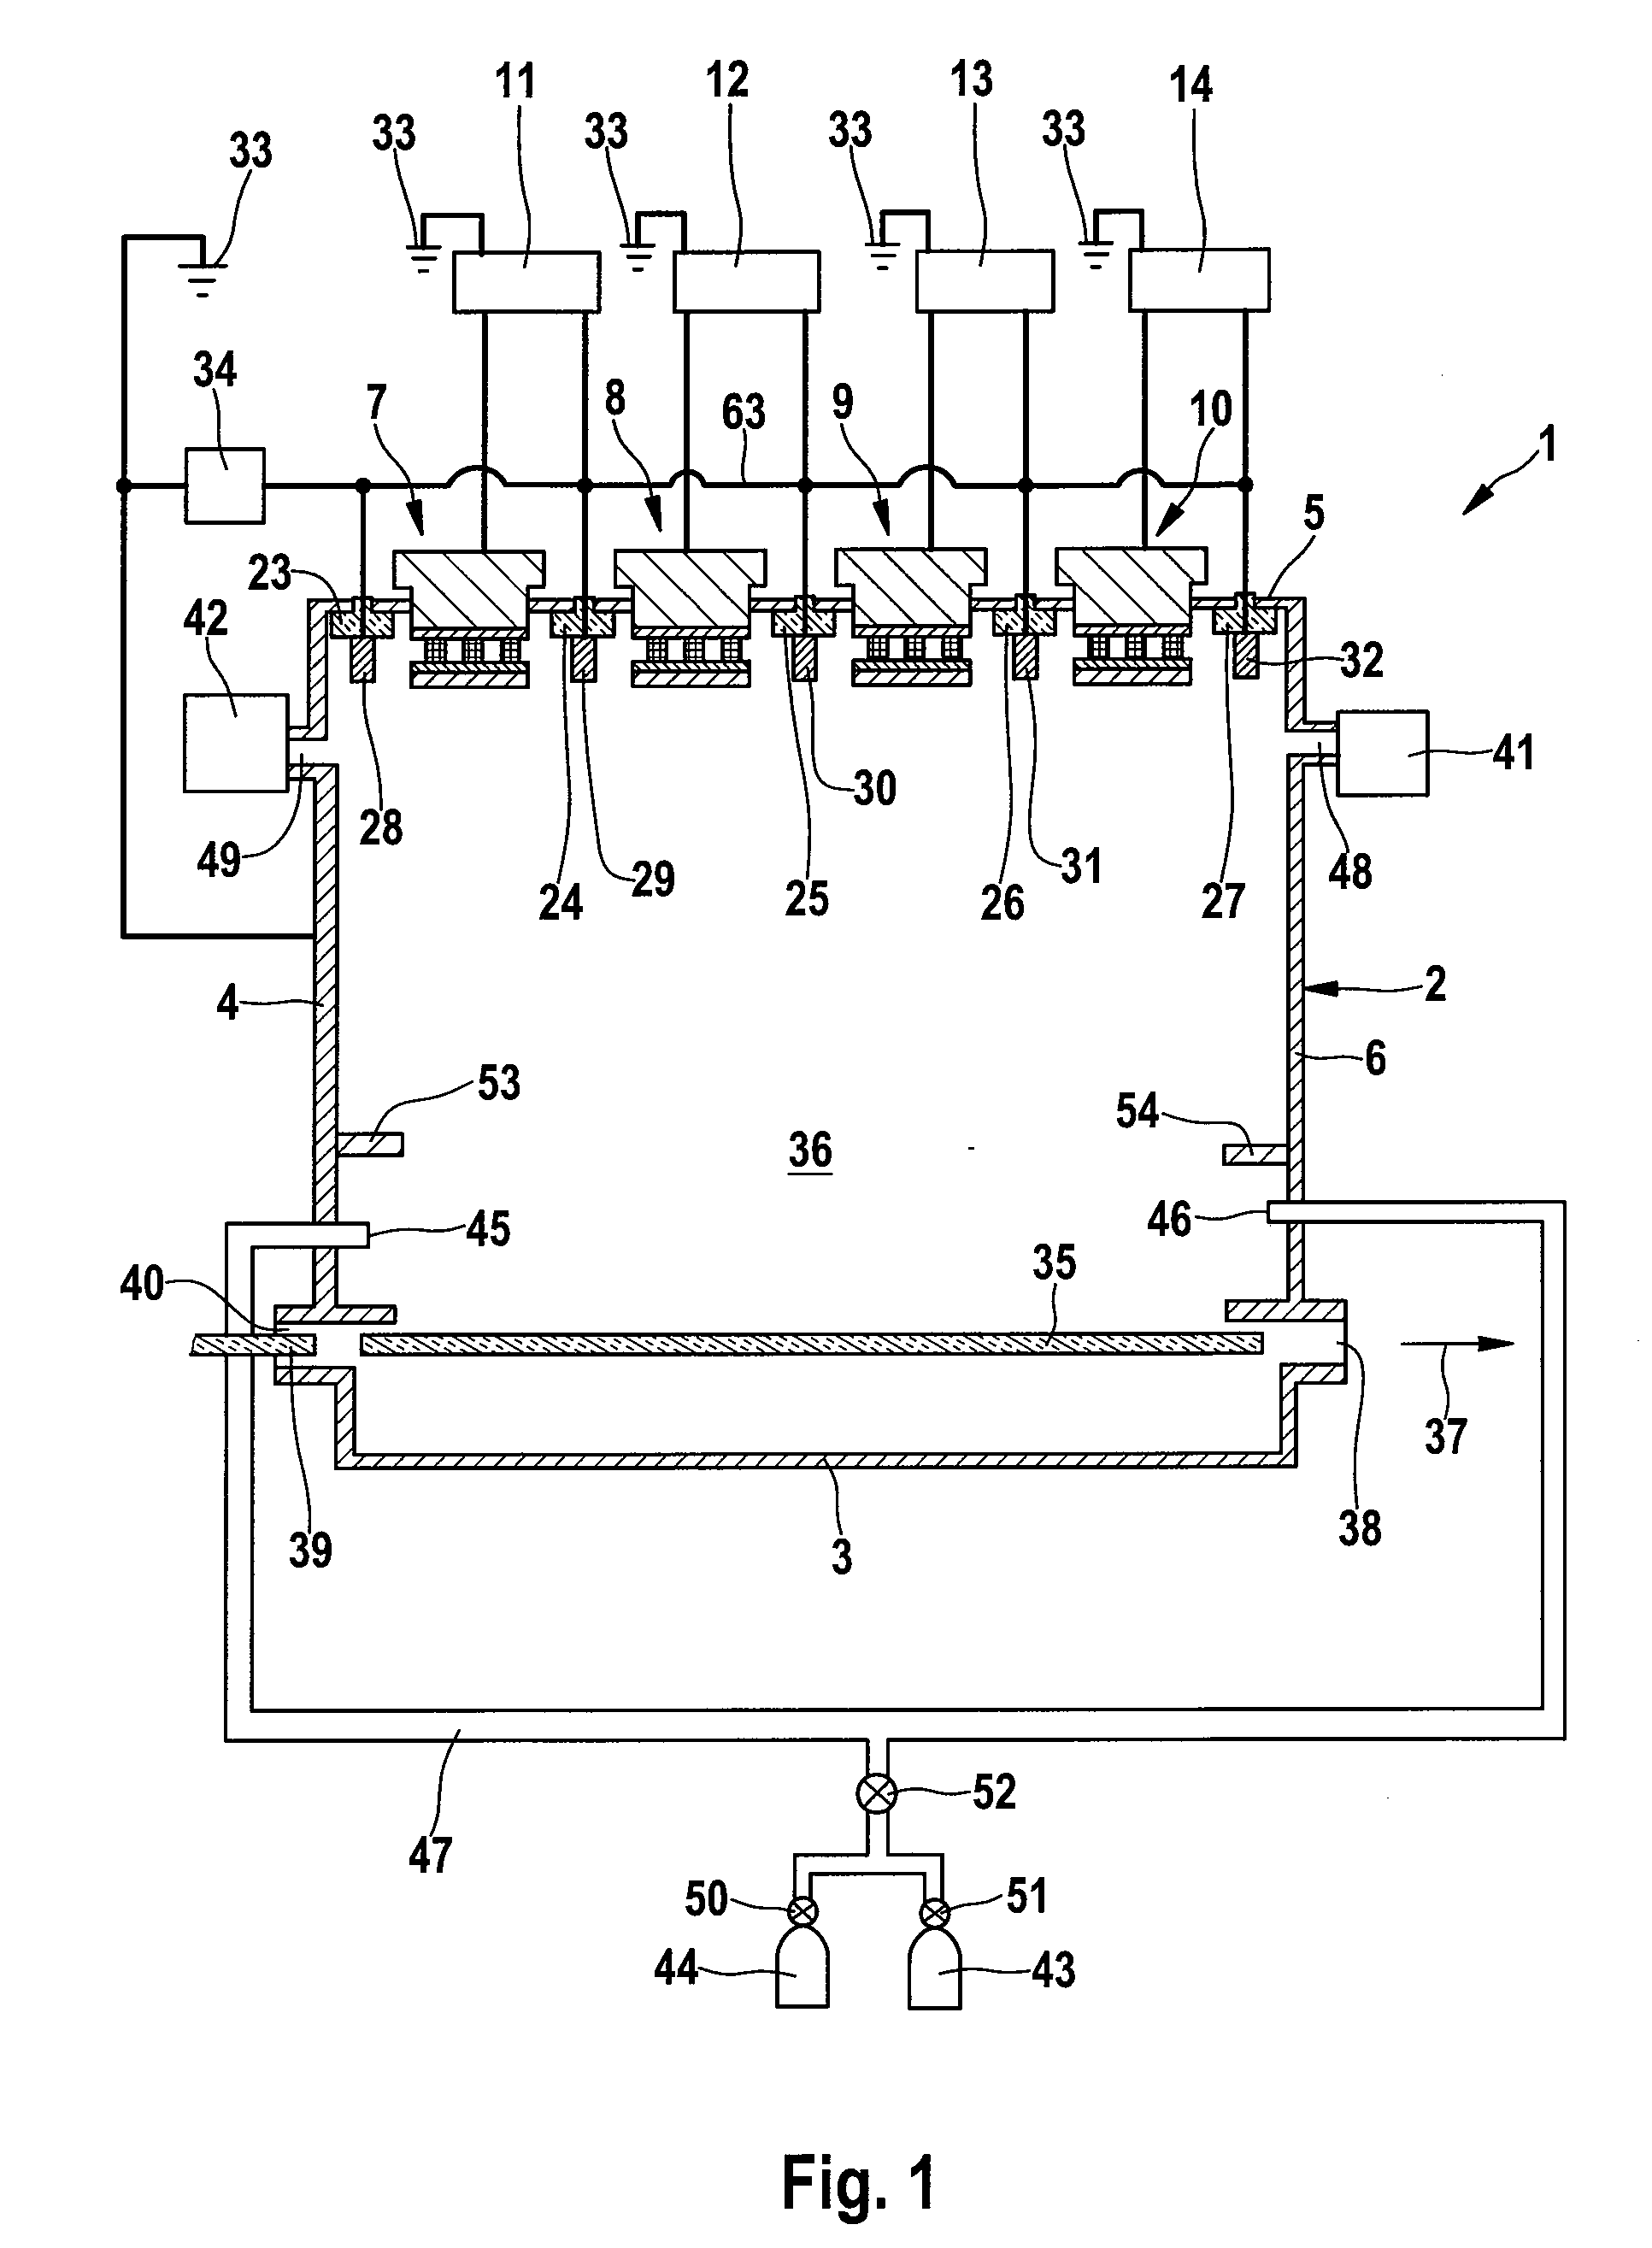 Apparatus for treating a substrate